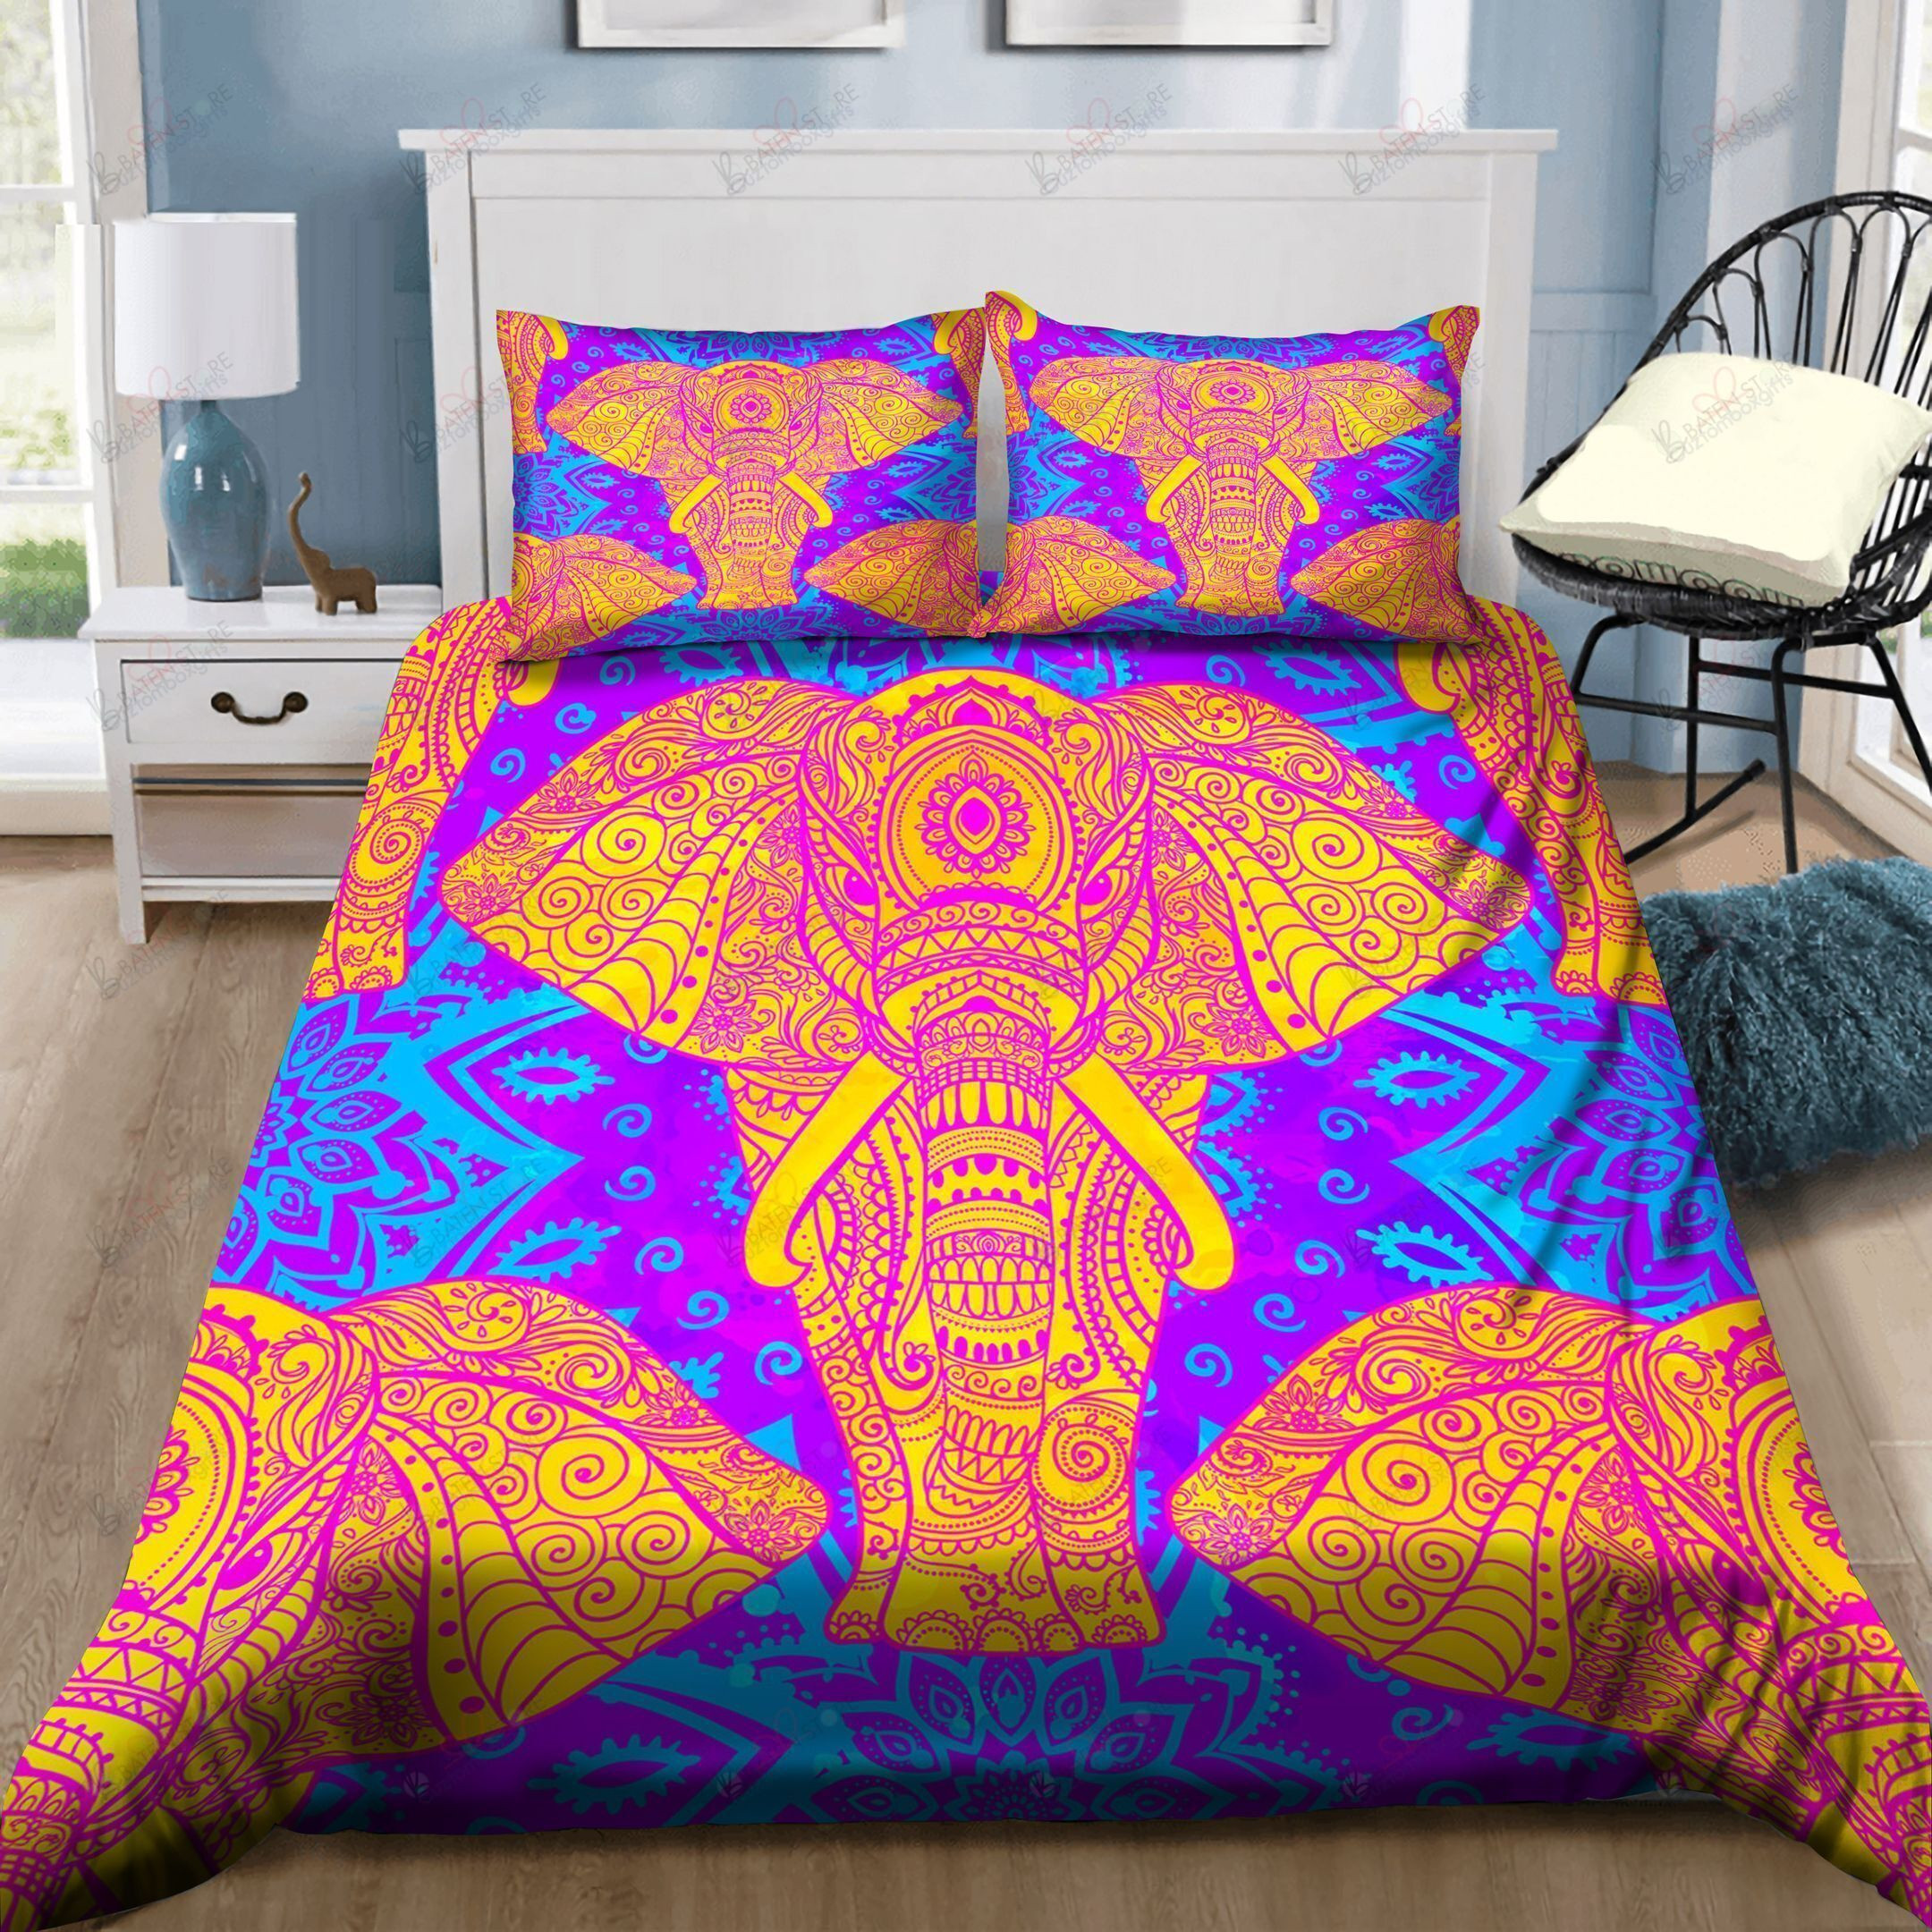 bohemian elephant bedding set with duvet cover perfect presents for birthdays holidays and special occasions bgxqs